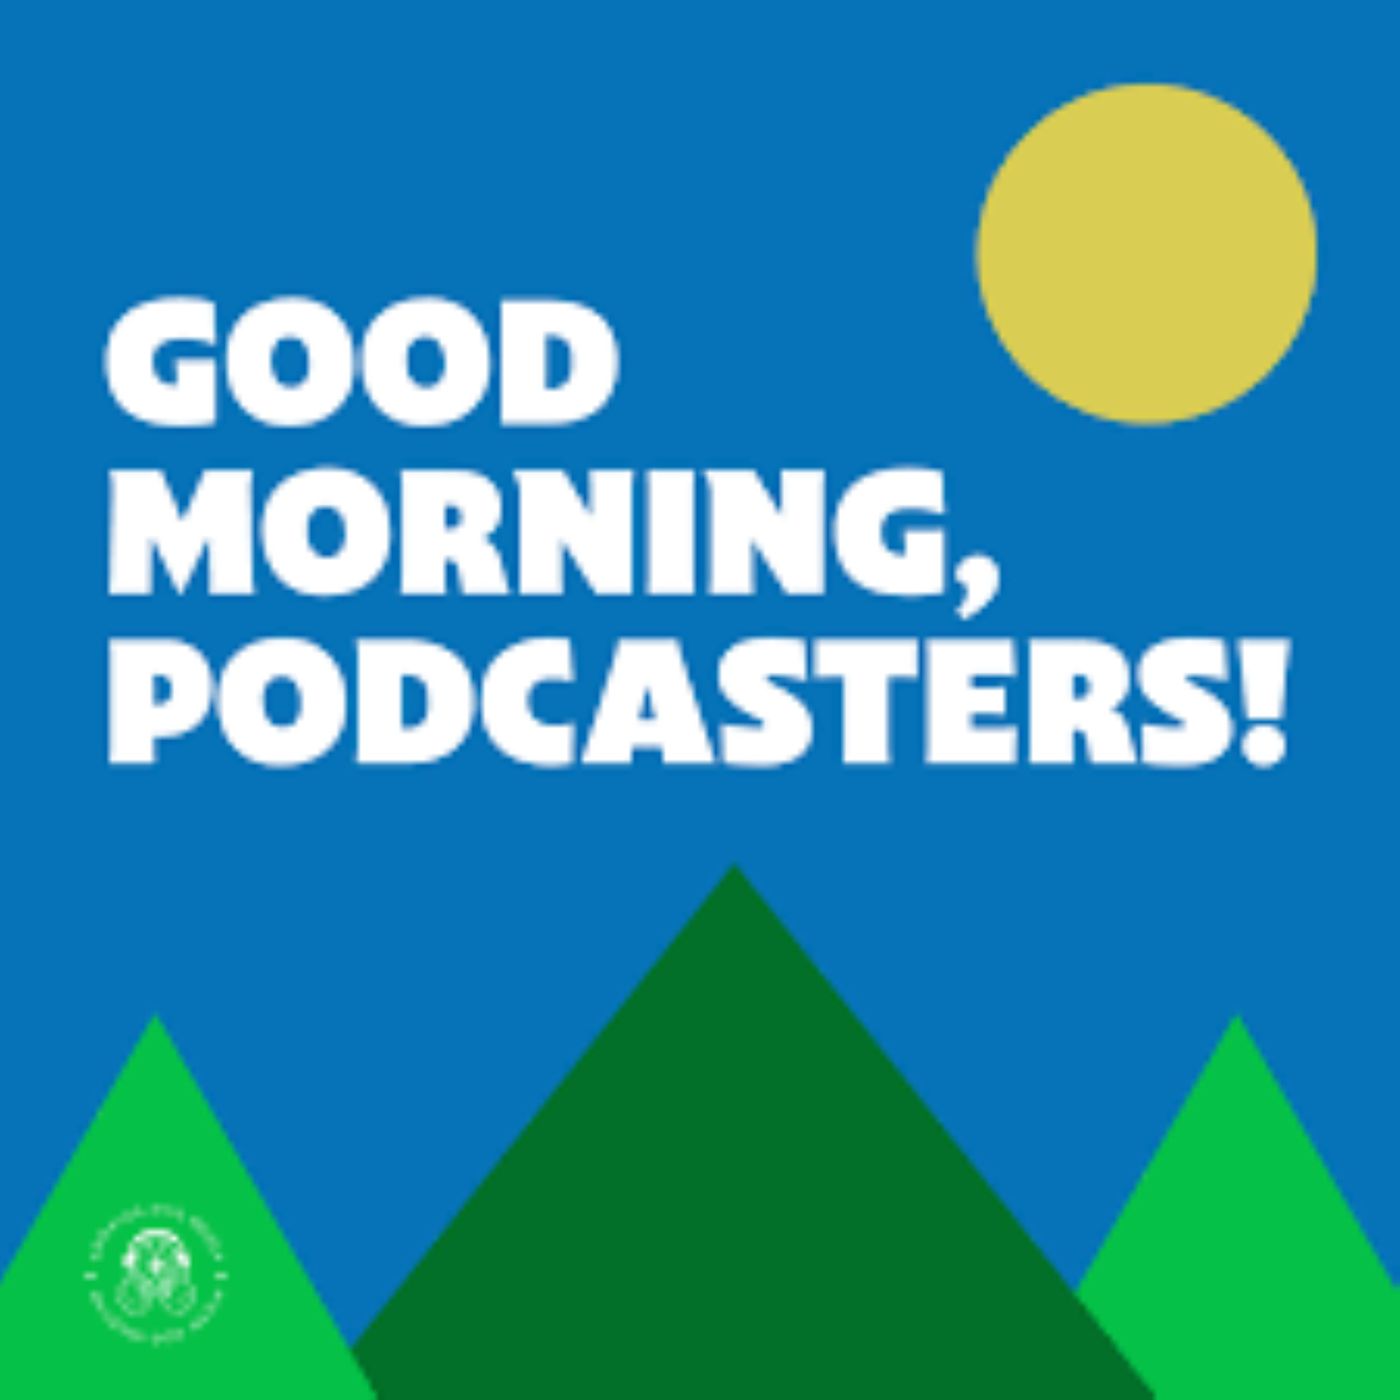 Good Morning Podcasters! Episodes 17-20